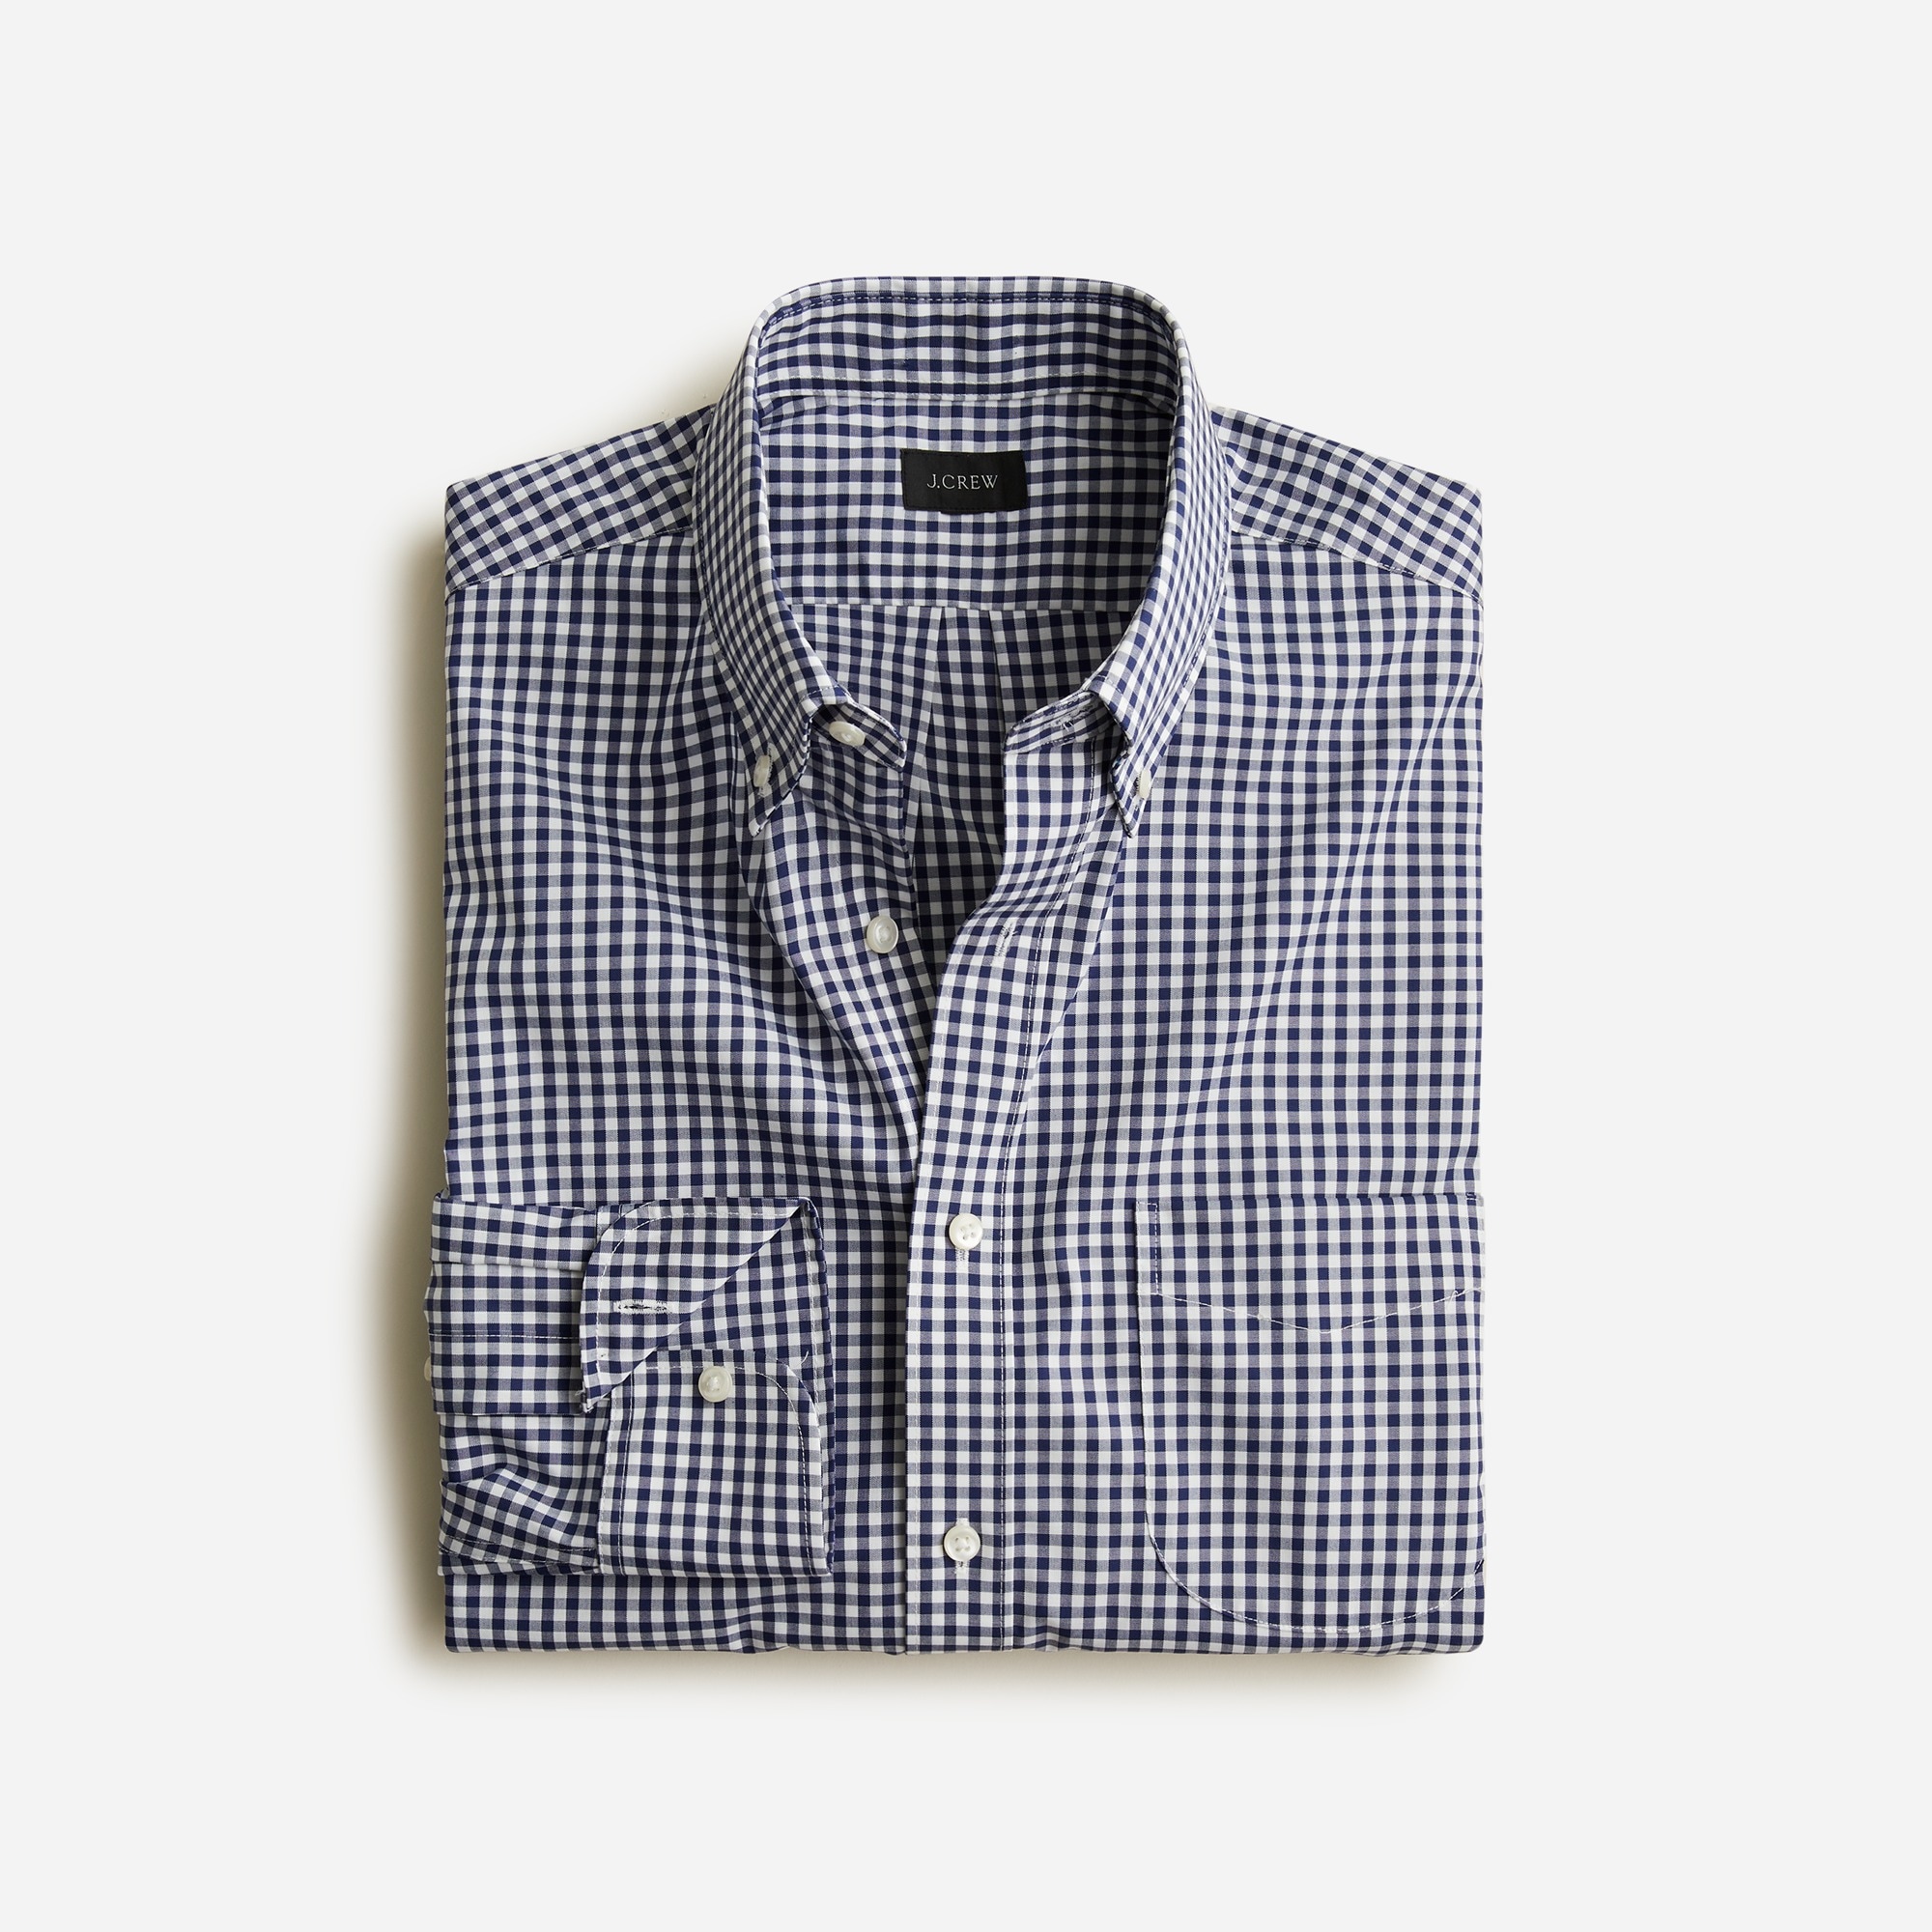 mens Tall Bowery wrinkle-free dress shirt with button-down collar